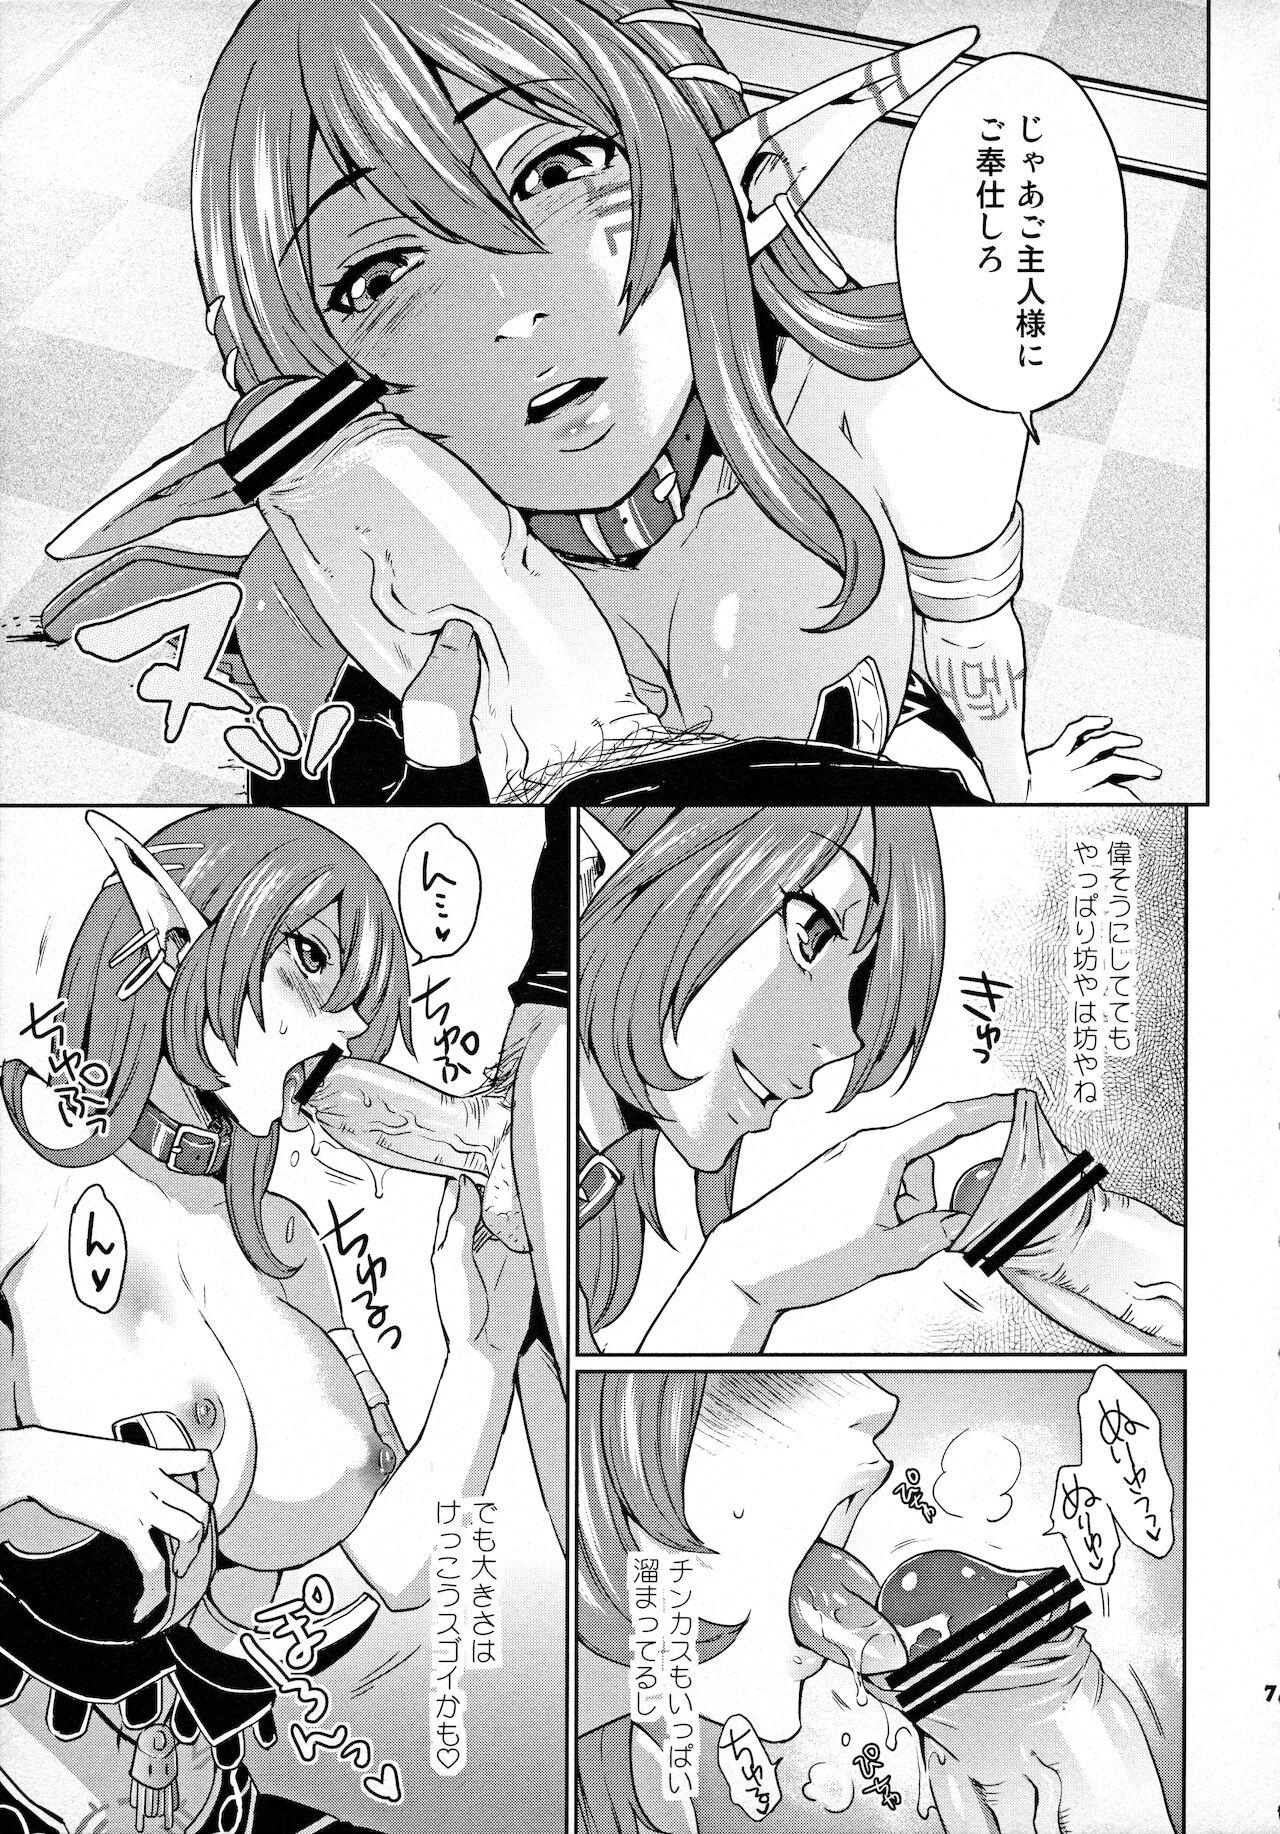 Babes Hoshi no Umi no Miboujin - The Widow of The Star Ocean - Star ocean 4 Blondes - Page 6